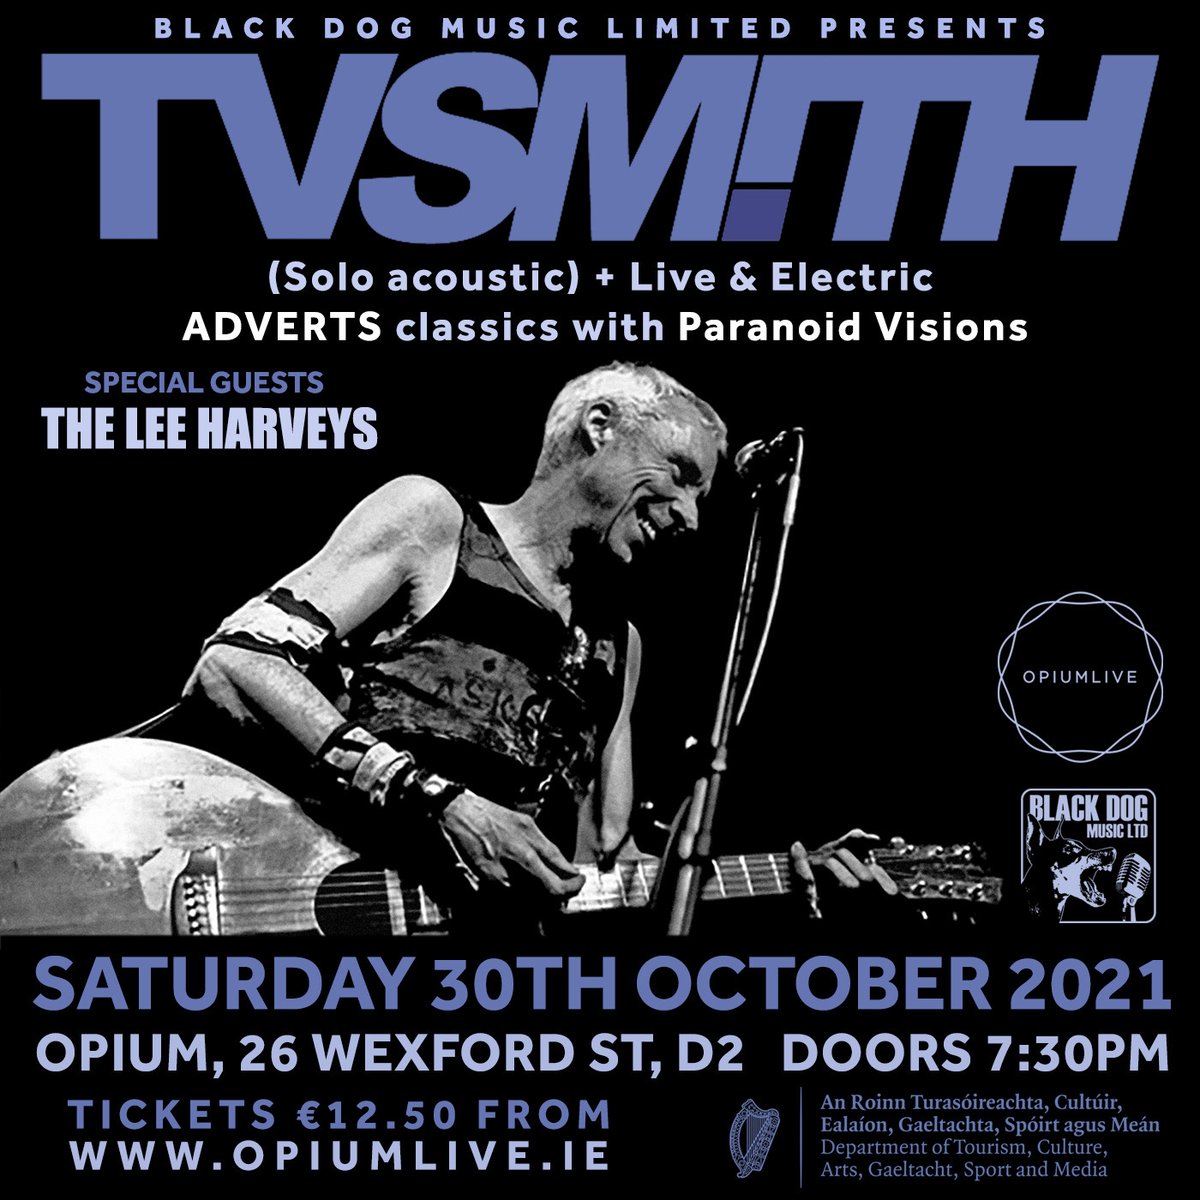 Don’t miss: TV Smith & special guests The Lee Harveys  

Sat 30th October, 7:30pm
Opium Live, Dublin

Tickets €12.50 on sale Friday at 10am from Opiumlive.ie

Funded by @DeptCulturelRL
Proudly presented by #blackdogmusic #TVSmith